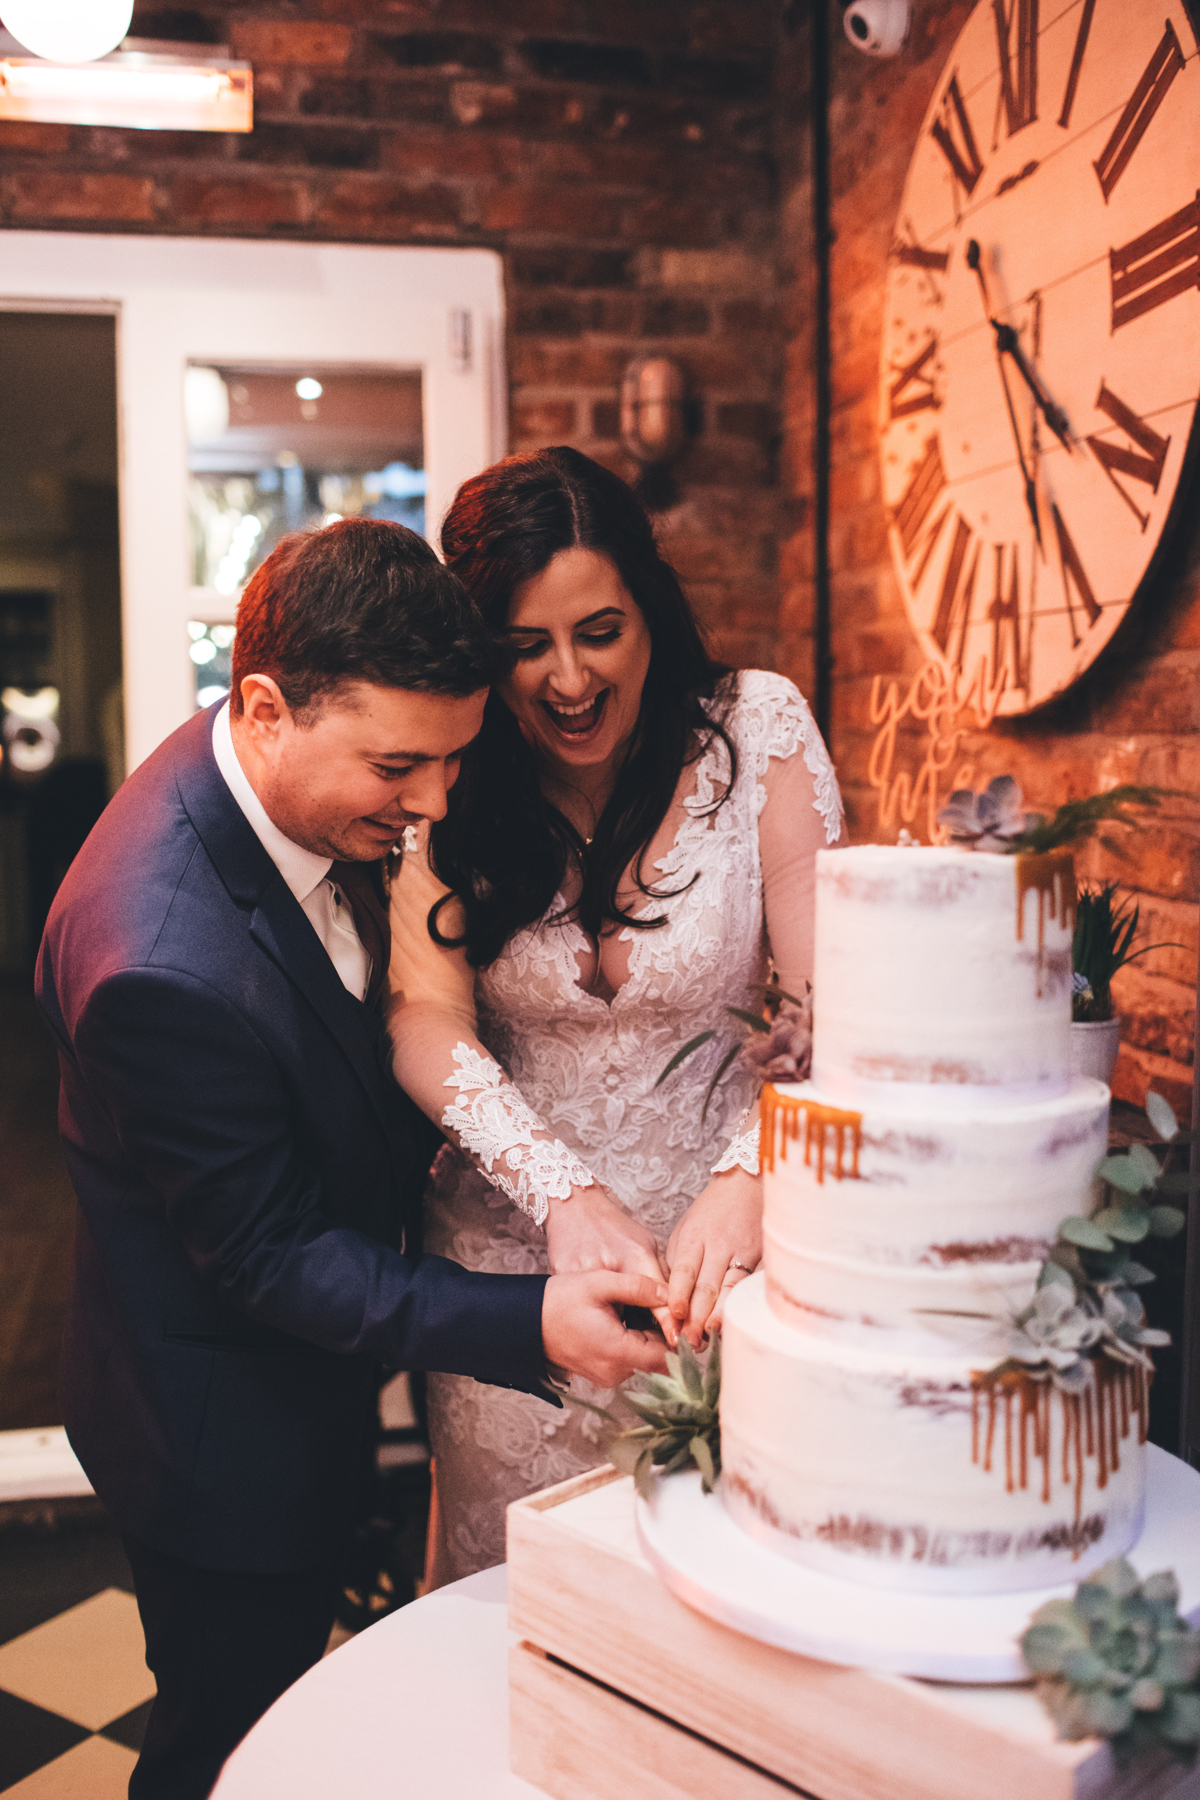 Bride and Groom cutting their three tier wedding cake. There is a large clock with roman numerals on the brick wall above the cake